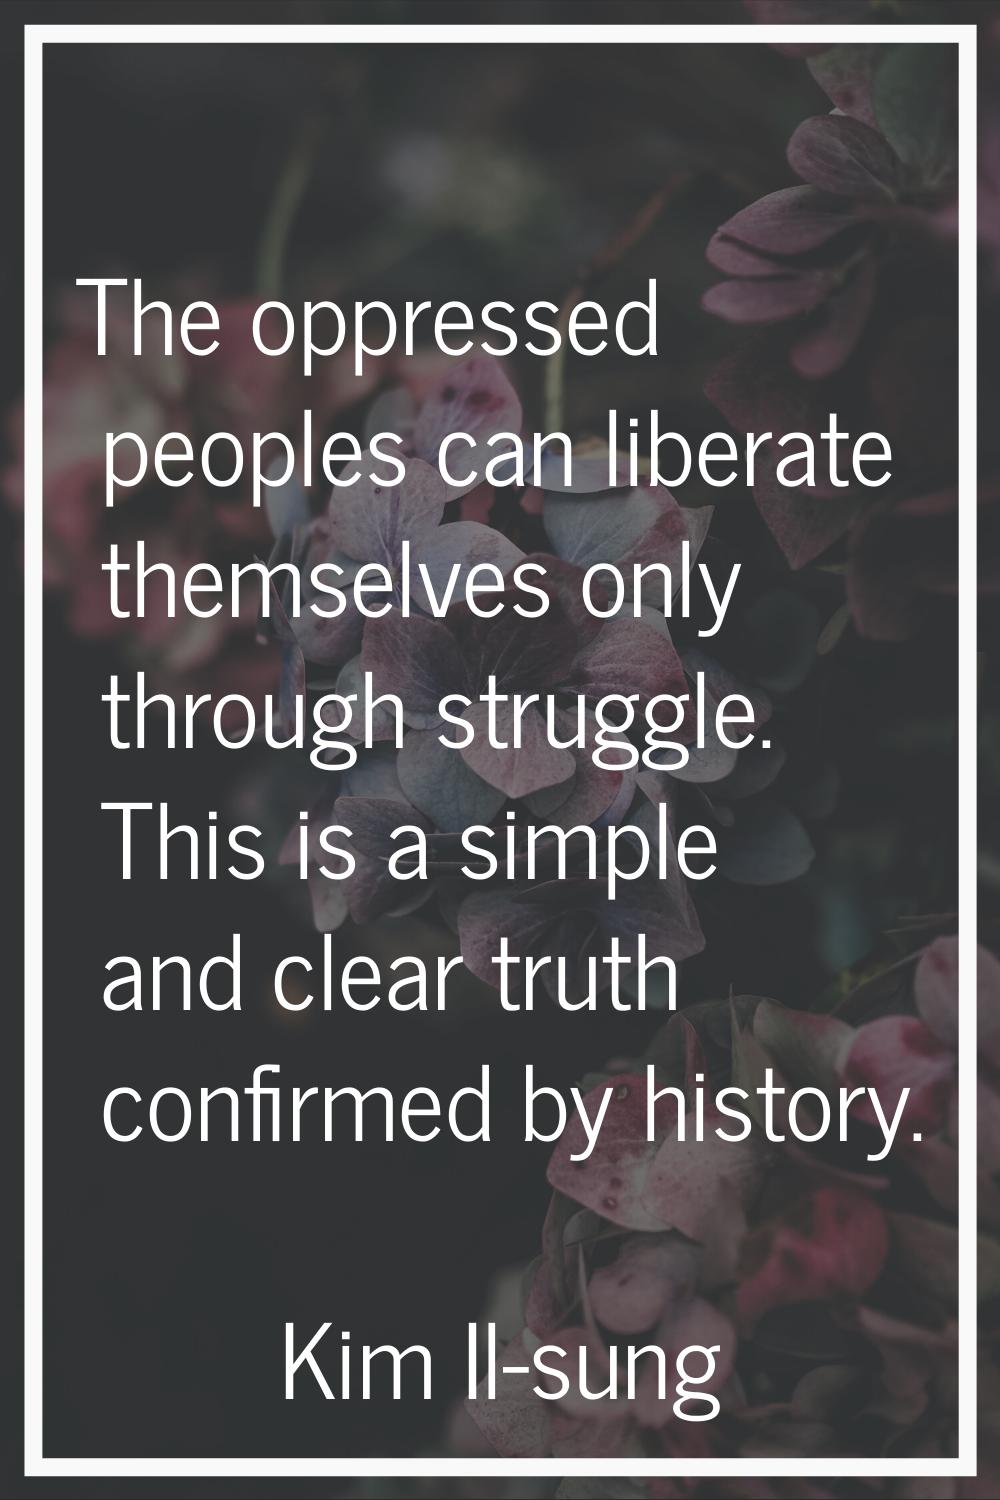 The oppressed peoples can liberate themselves only through struggle. This is a simple and clear tru